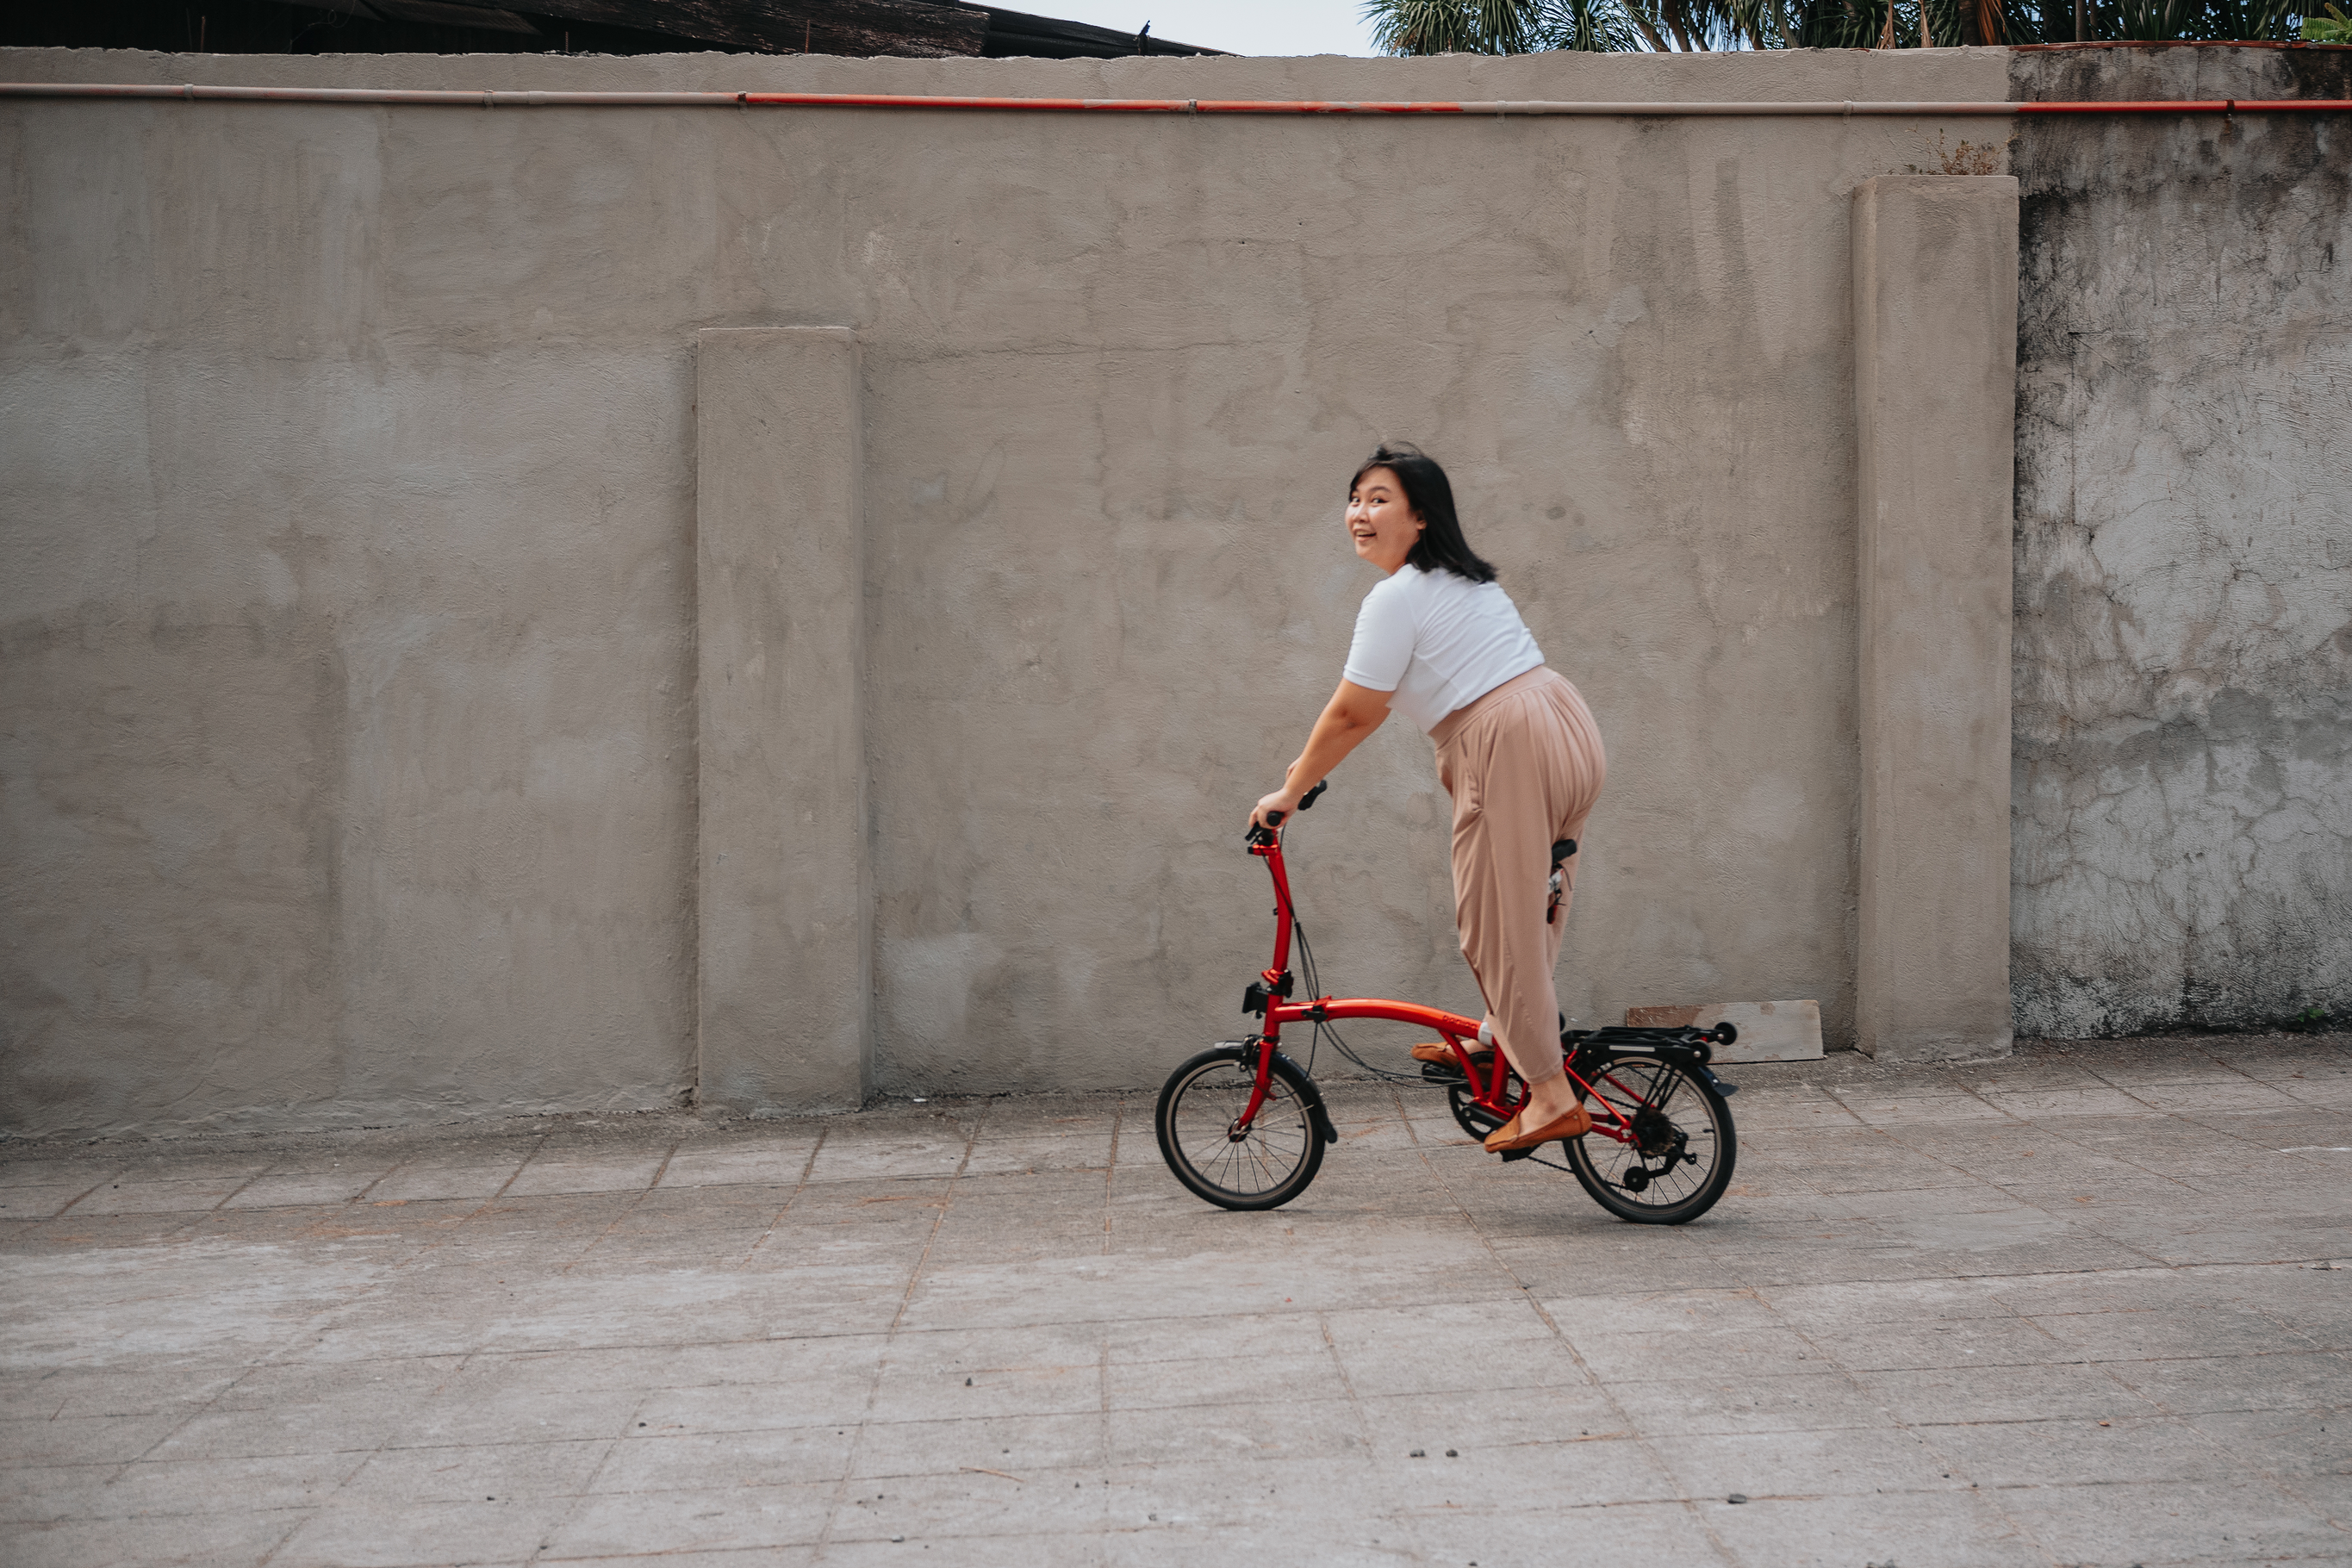 Chi riding her red Banian trifold while wearing a white top, a long beige flowy skirt, and brown loafers. Her expression shows that she's having fun, while turning to look at the camera. She's not fully seated on the bike, and instead is coasting on it while turning to go towards the left.